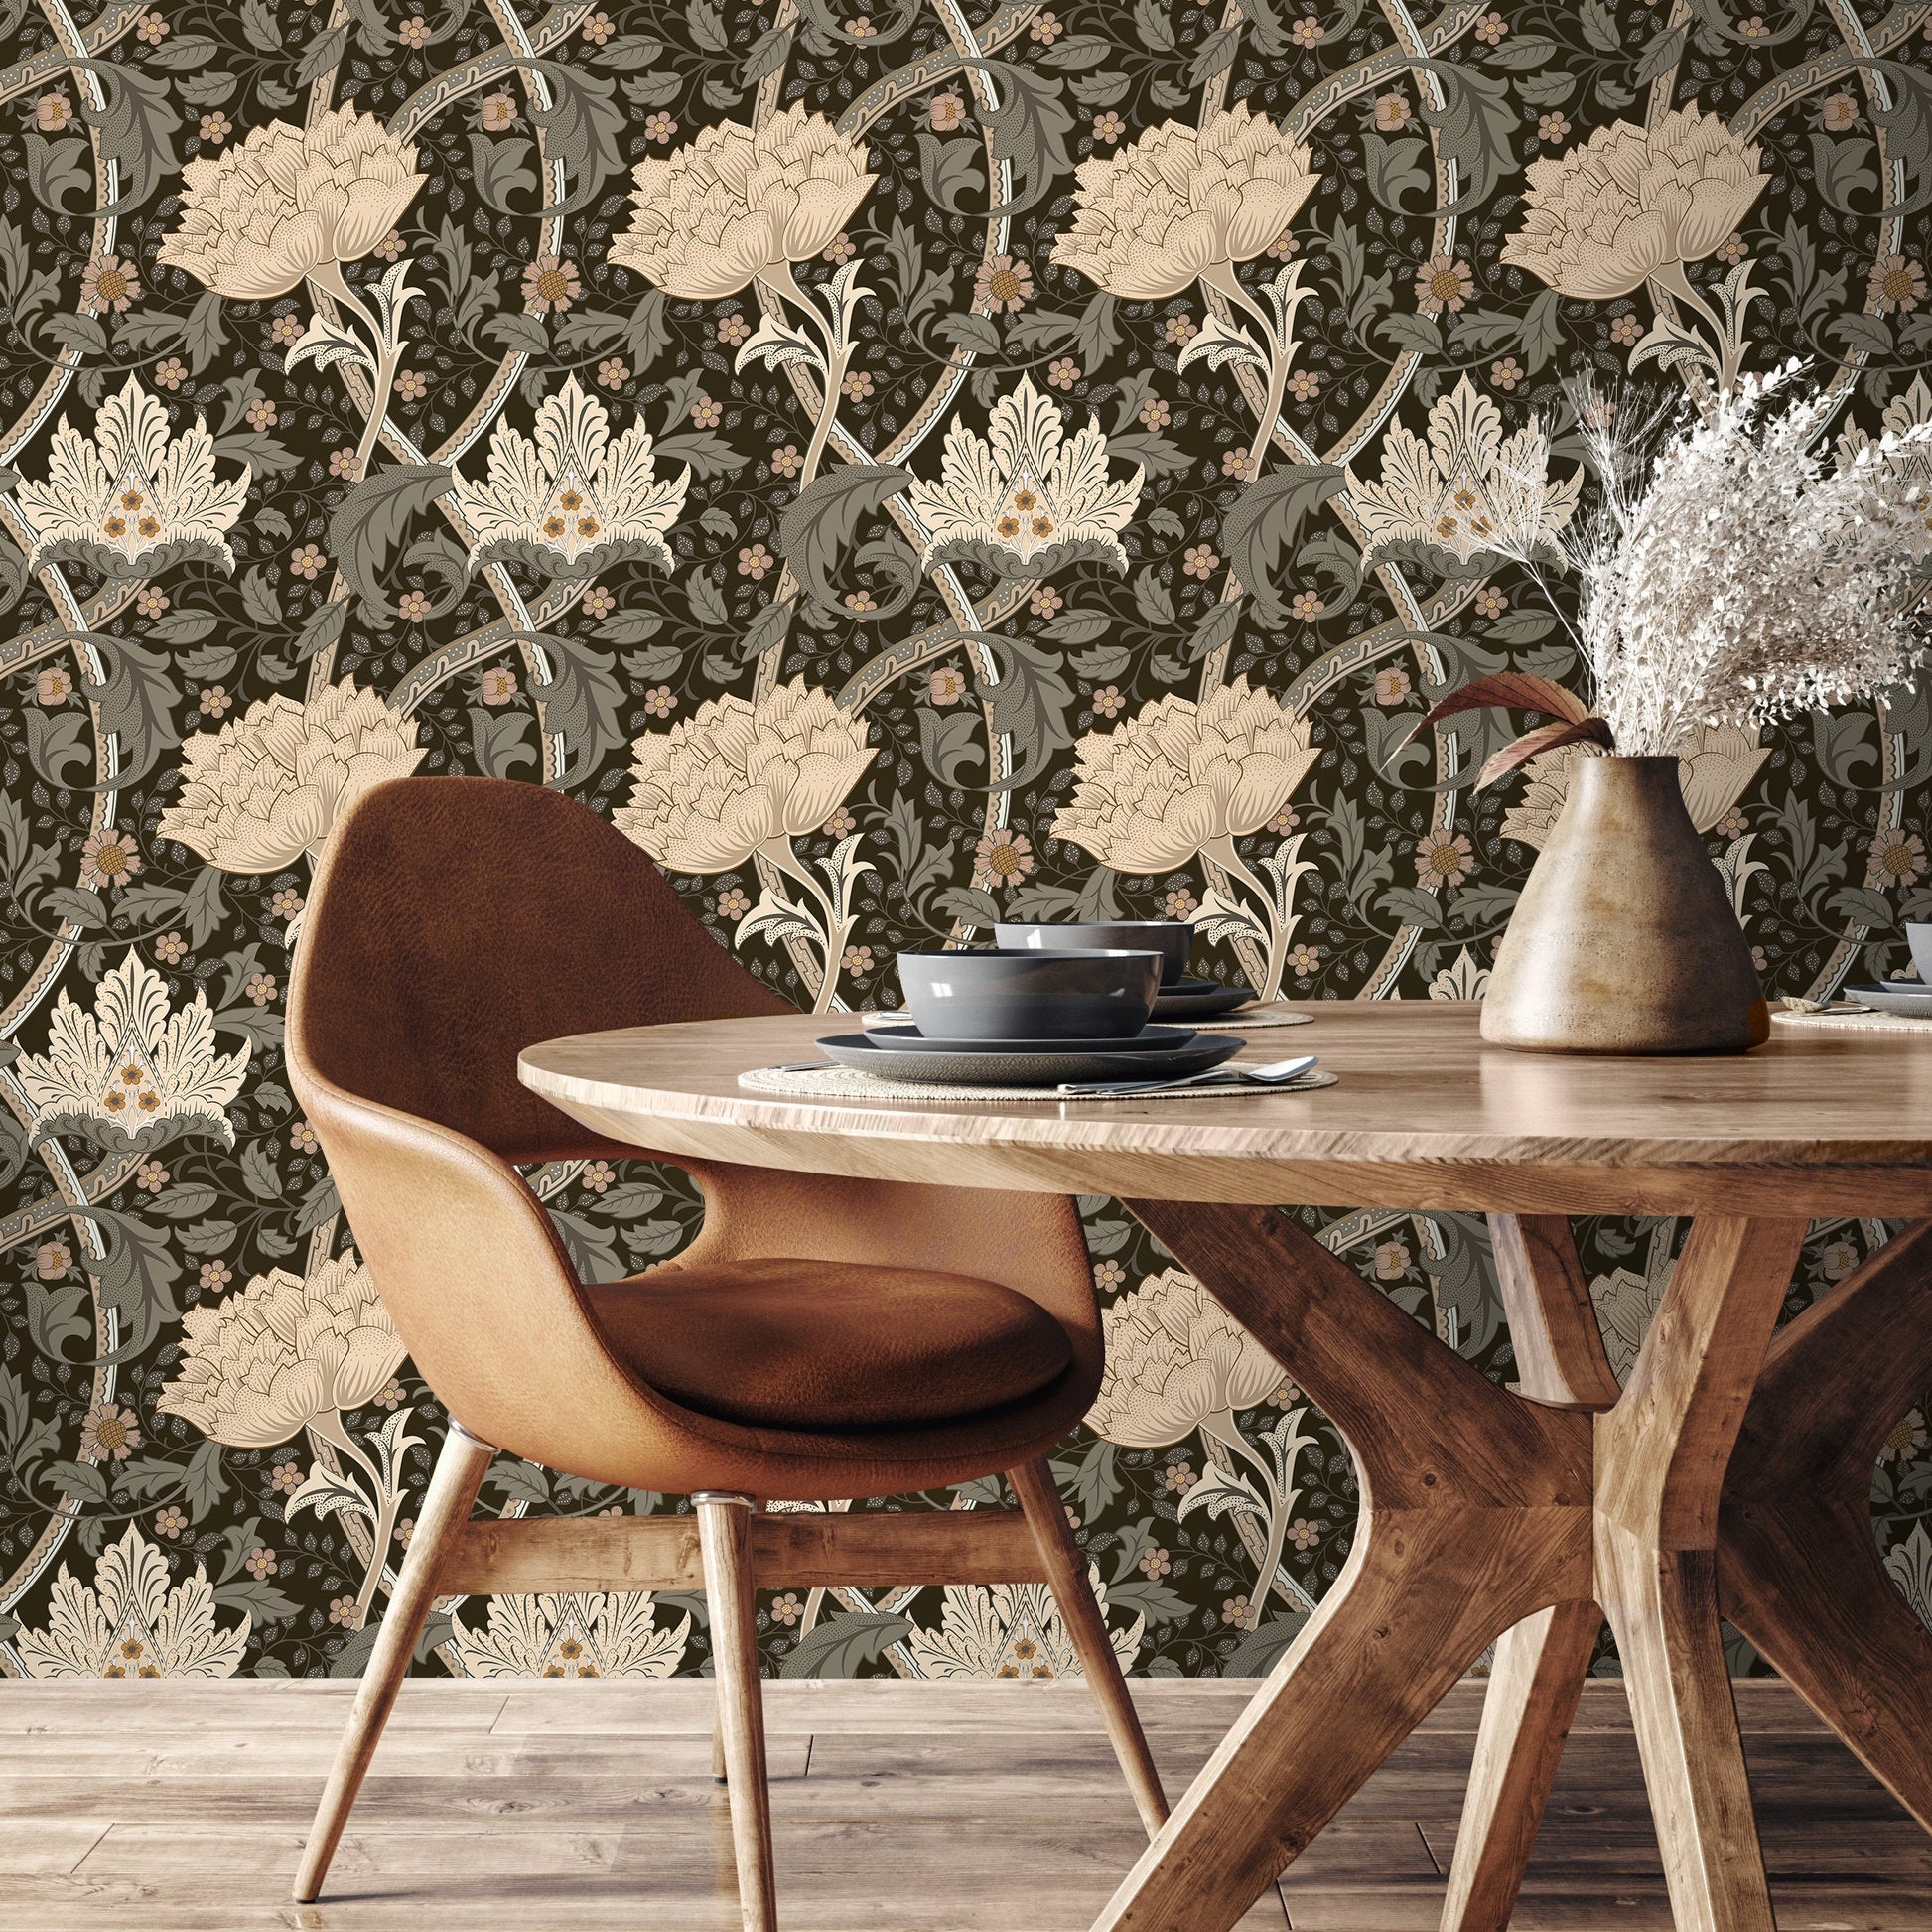 Taupe Floral William Morris Wallpaper / Peel and Stick Wallpaper Removable Wallpaper Home Decor Wall Art Wall Decor Room Decor - C991